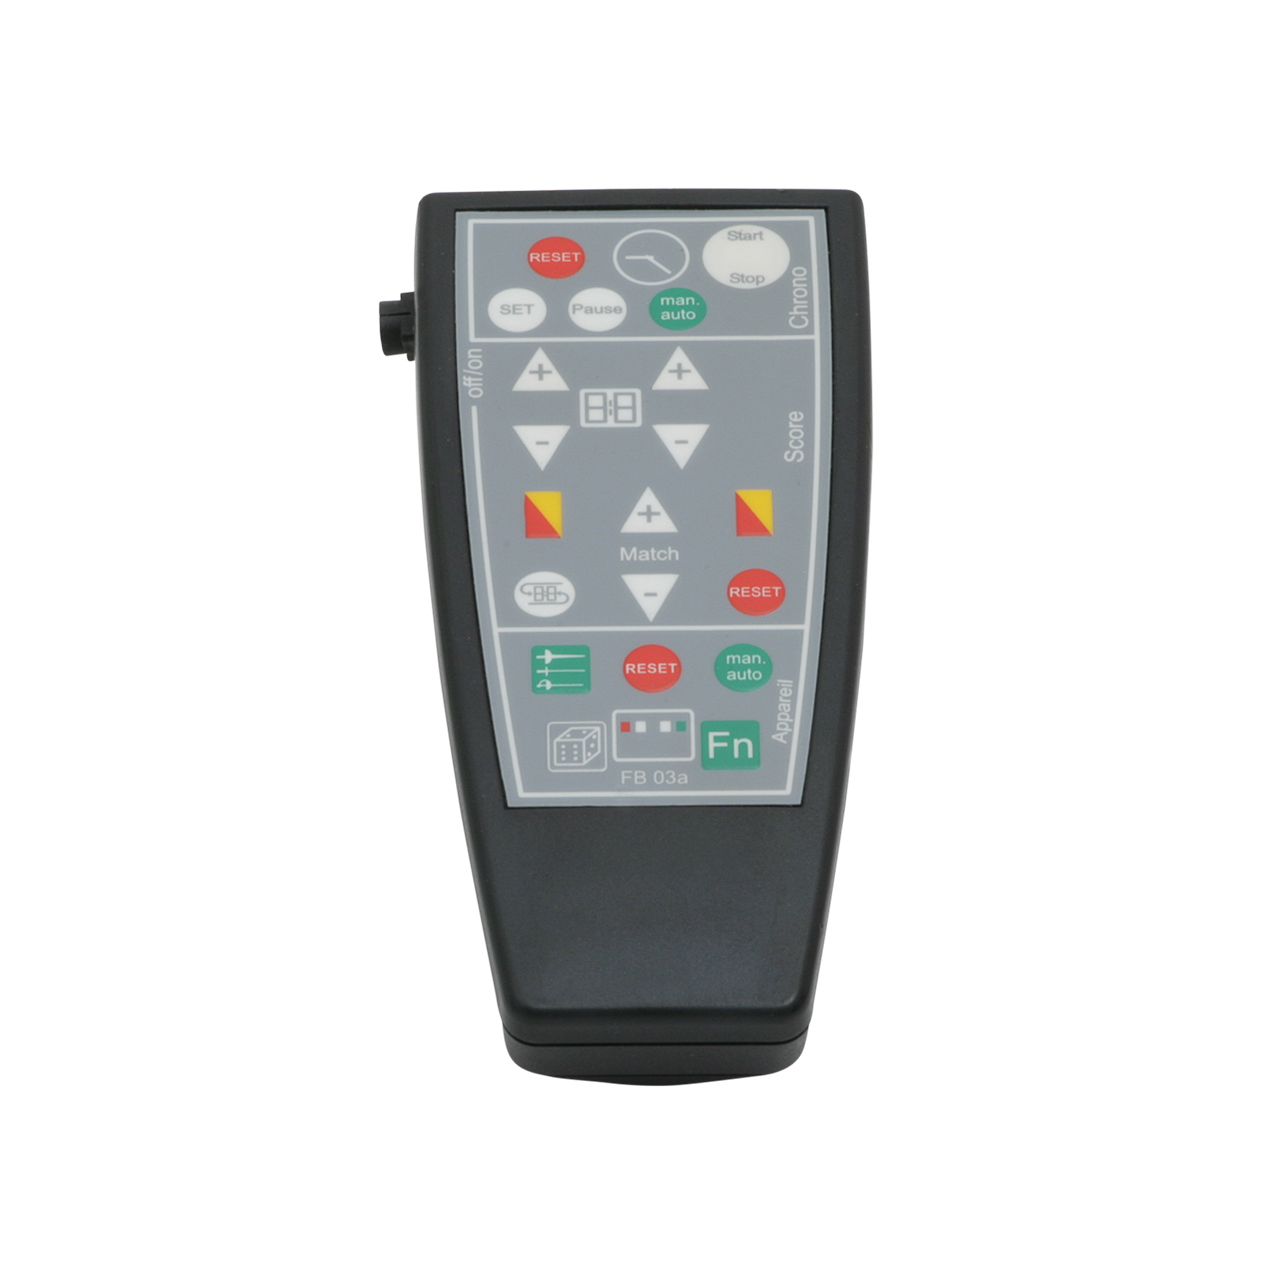 All-In-One signalling unit FIE "FMA 21" with remote control